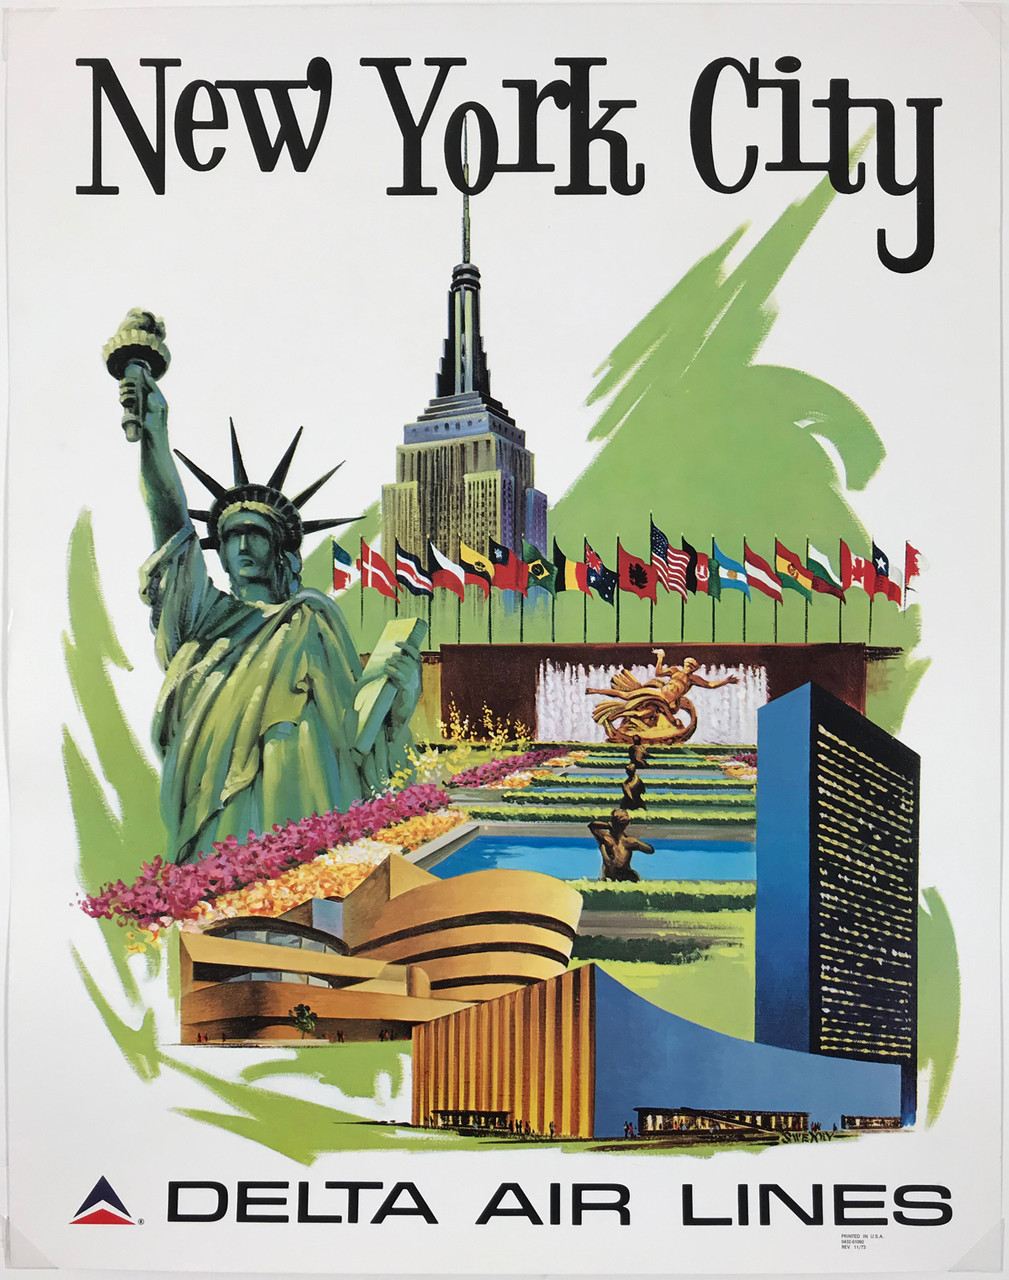 Delta Air Lines New York City by Sweney Original 1970's Vintage American Passenger Airline Travel Advertisement Lithograph Poster.